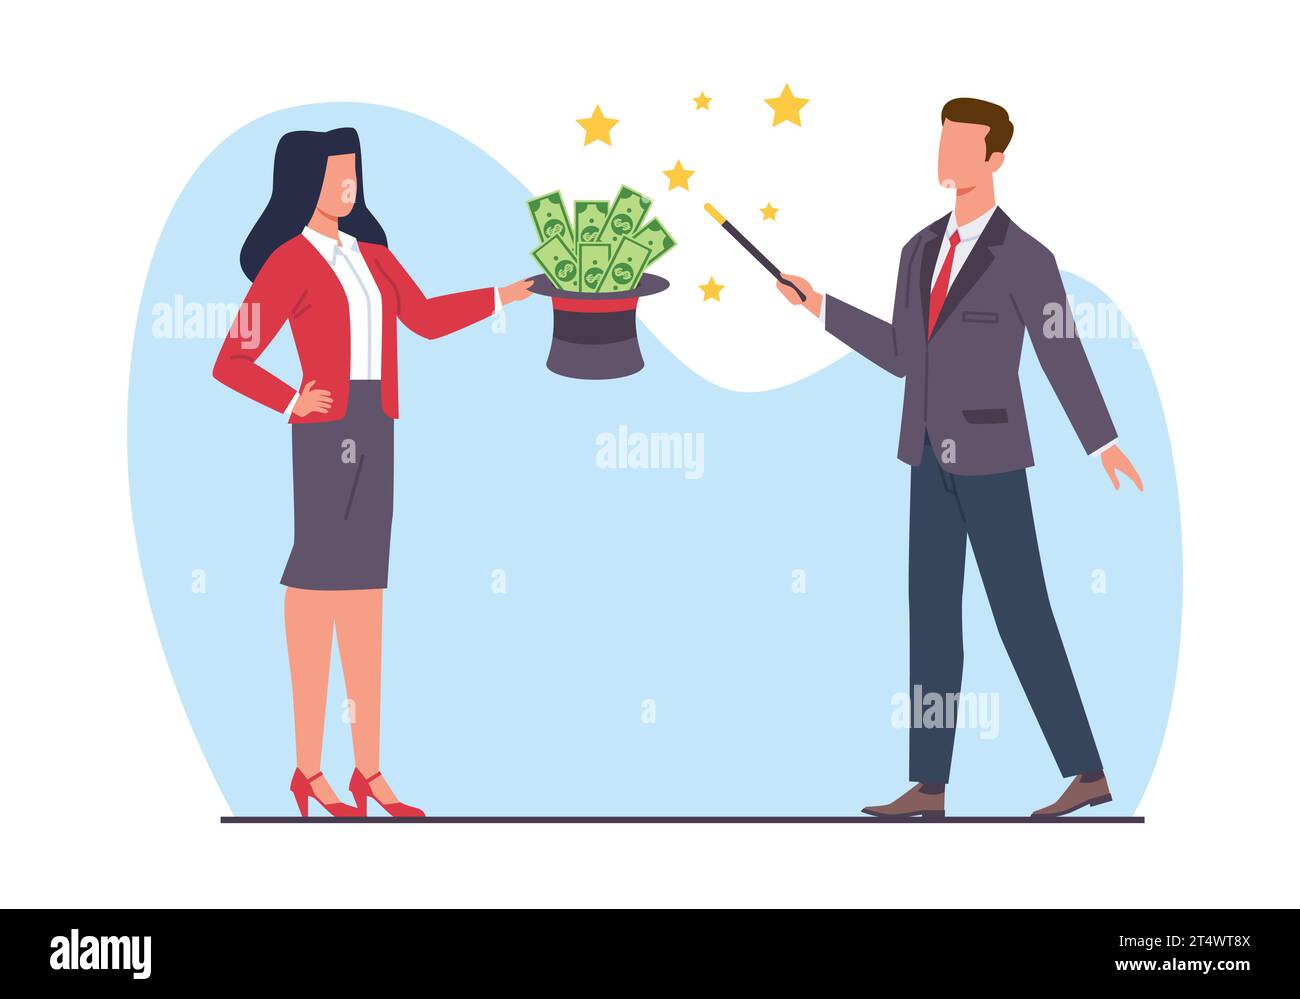 Businessman with magic wand and hat full of money. Perform successful trick. Entrepreneur magically makes income. Quick way to get rich. Cartoon flat Stock Vector